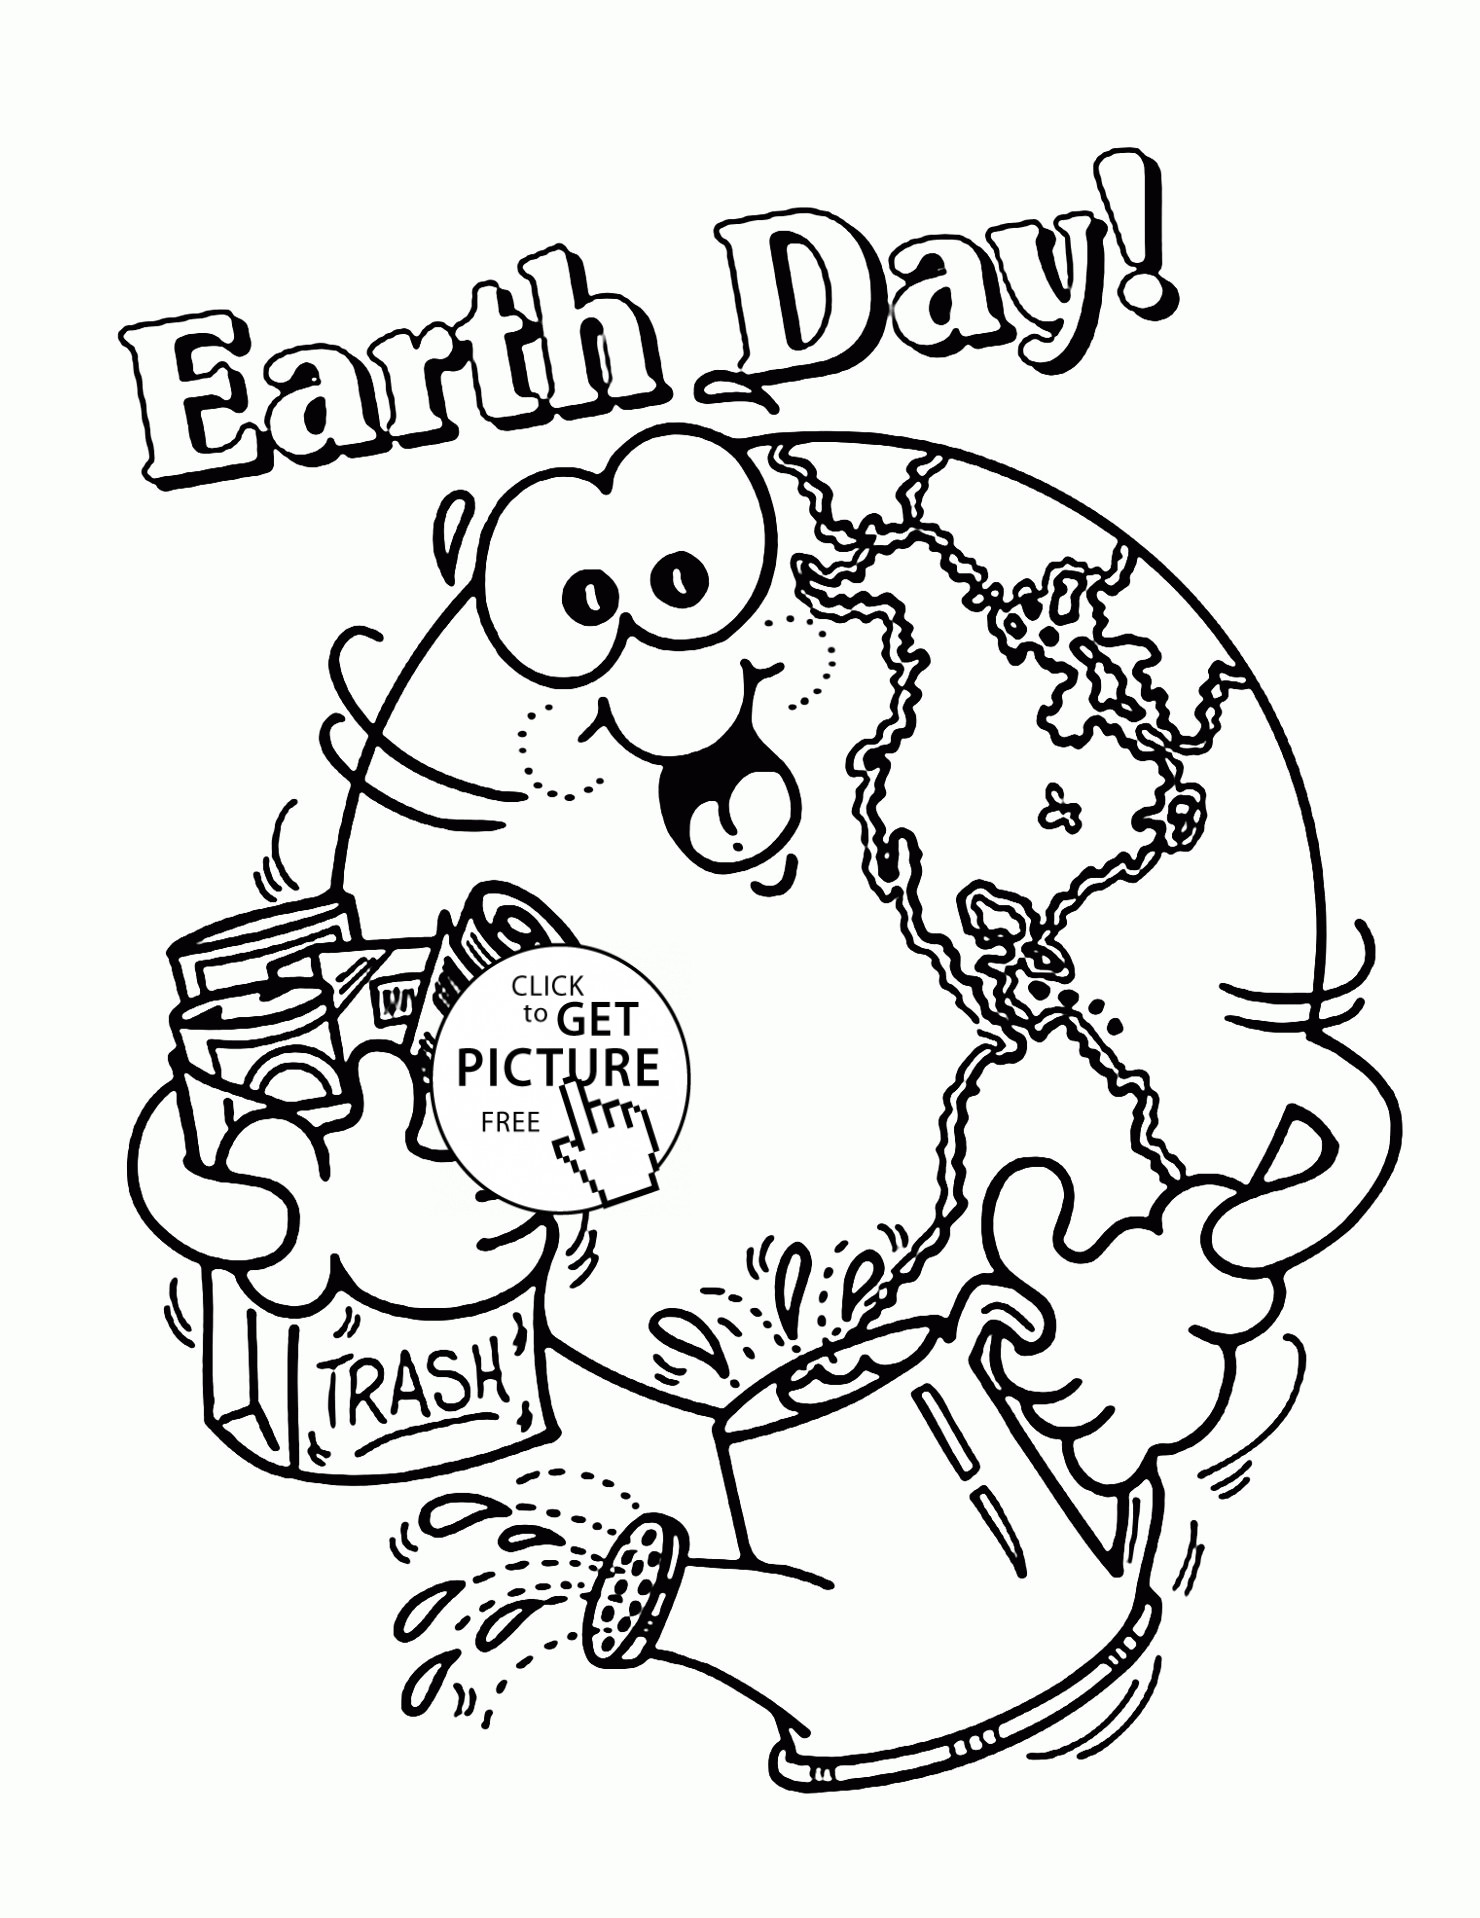 Earth Day Printable Coloring Pages
 Earth day coloring pages